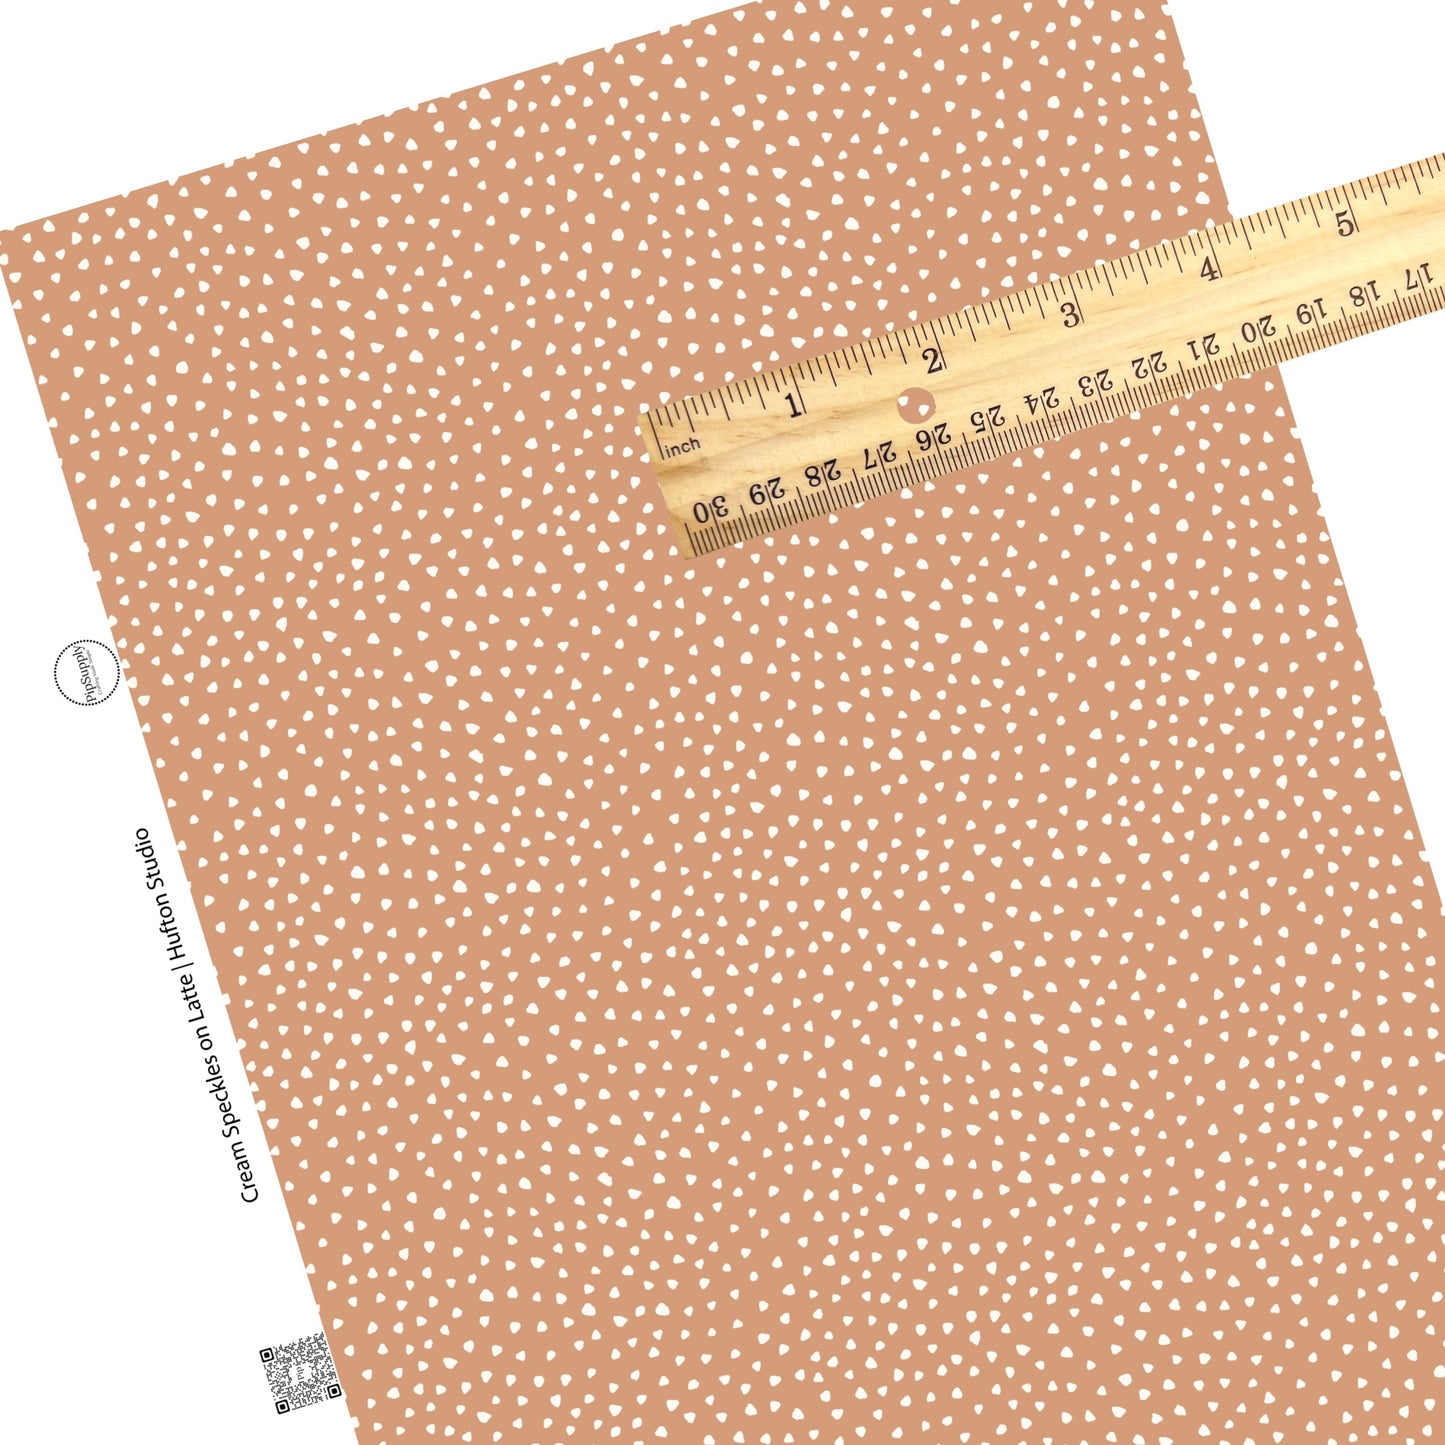 These speckled themed faux leather sheets contain the following design elements: small cream speckled dots on tan. Our CPSIA compliant faux leather sheets or rolls can be used for all types of crafting projects.